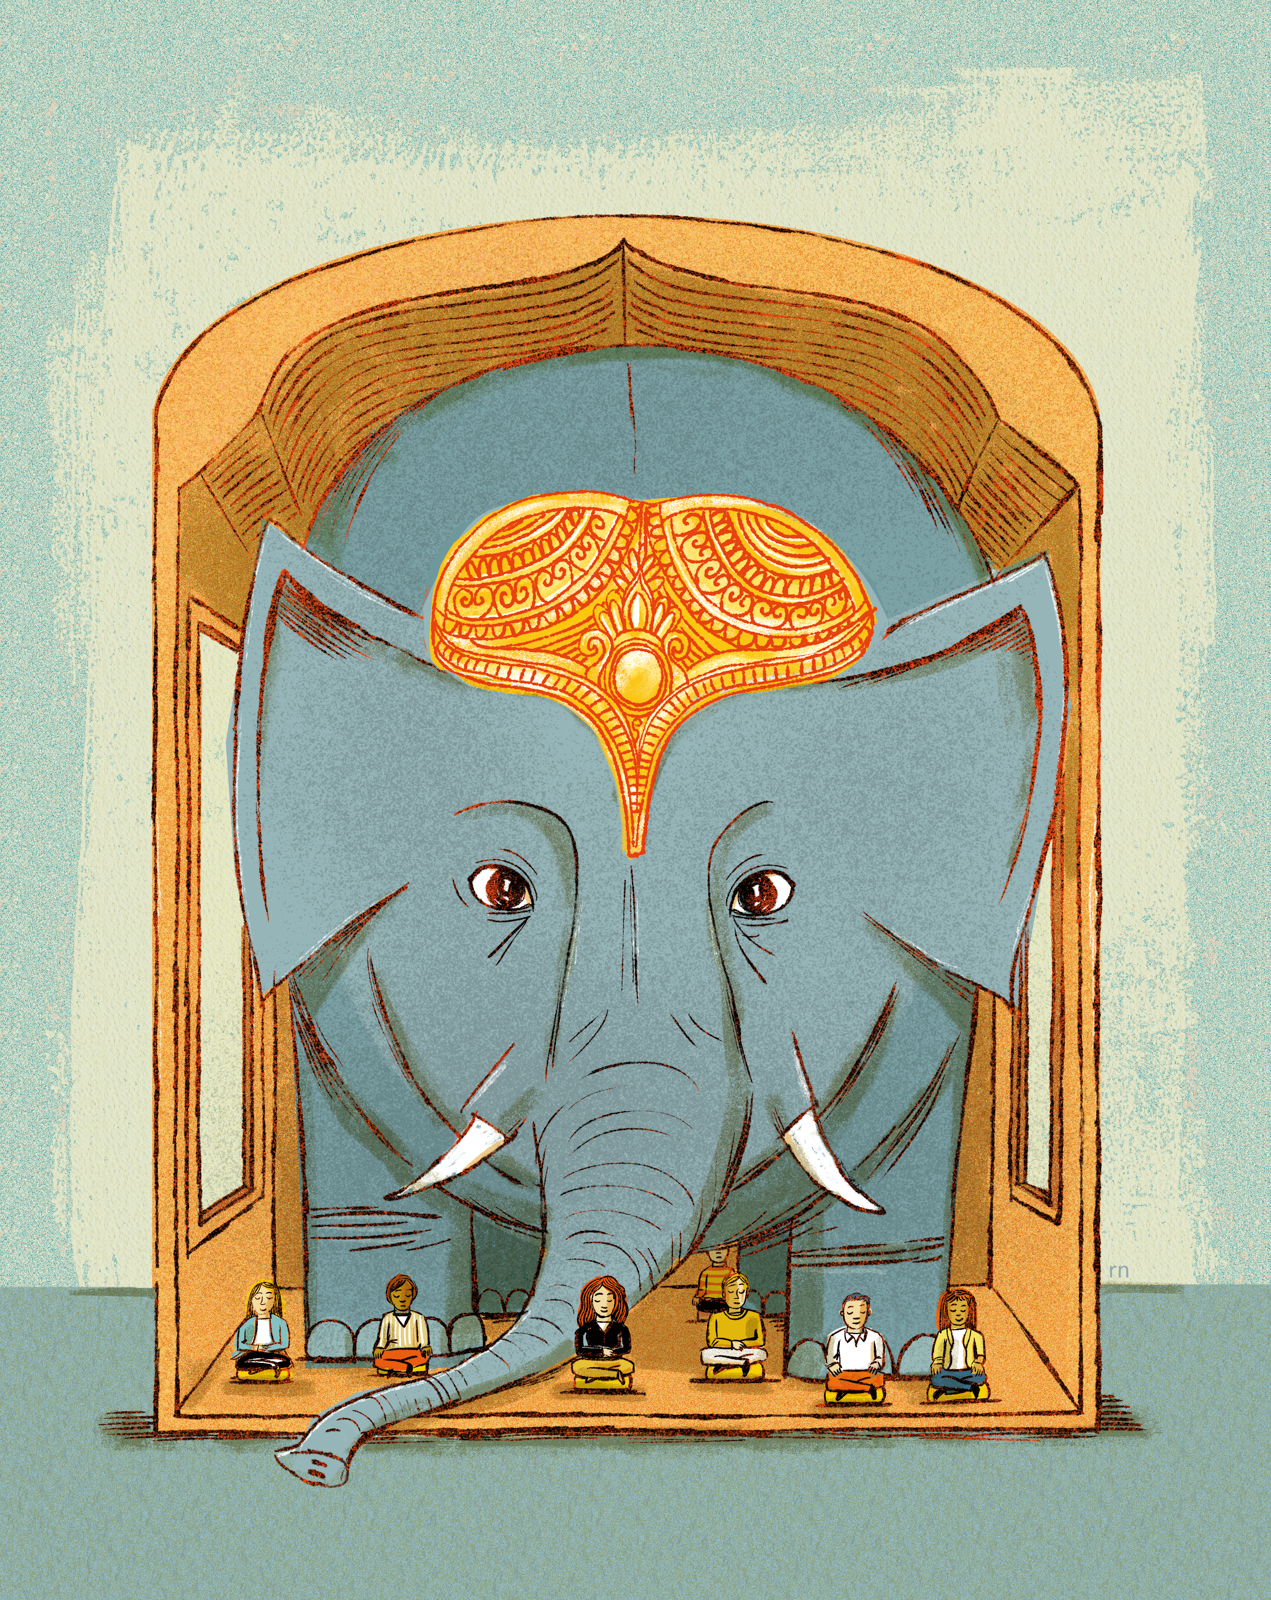 A comical illustration of an elephant filling a dharma hall while meditators ignore it.